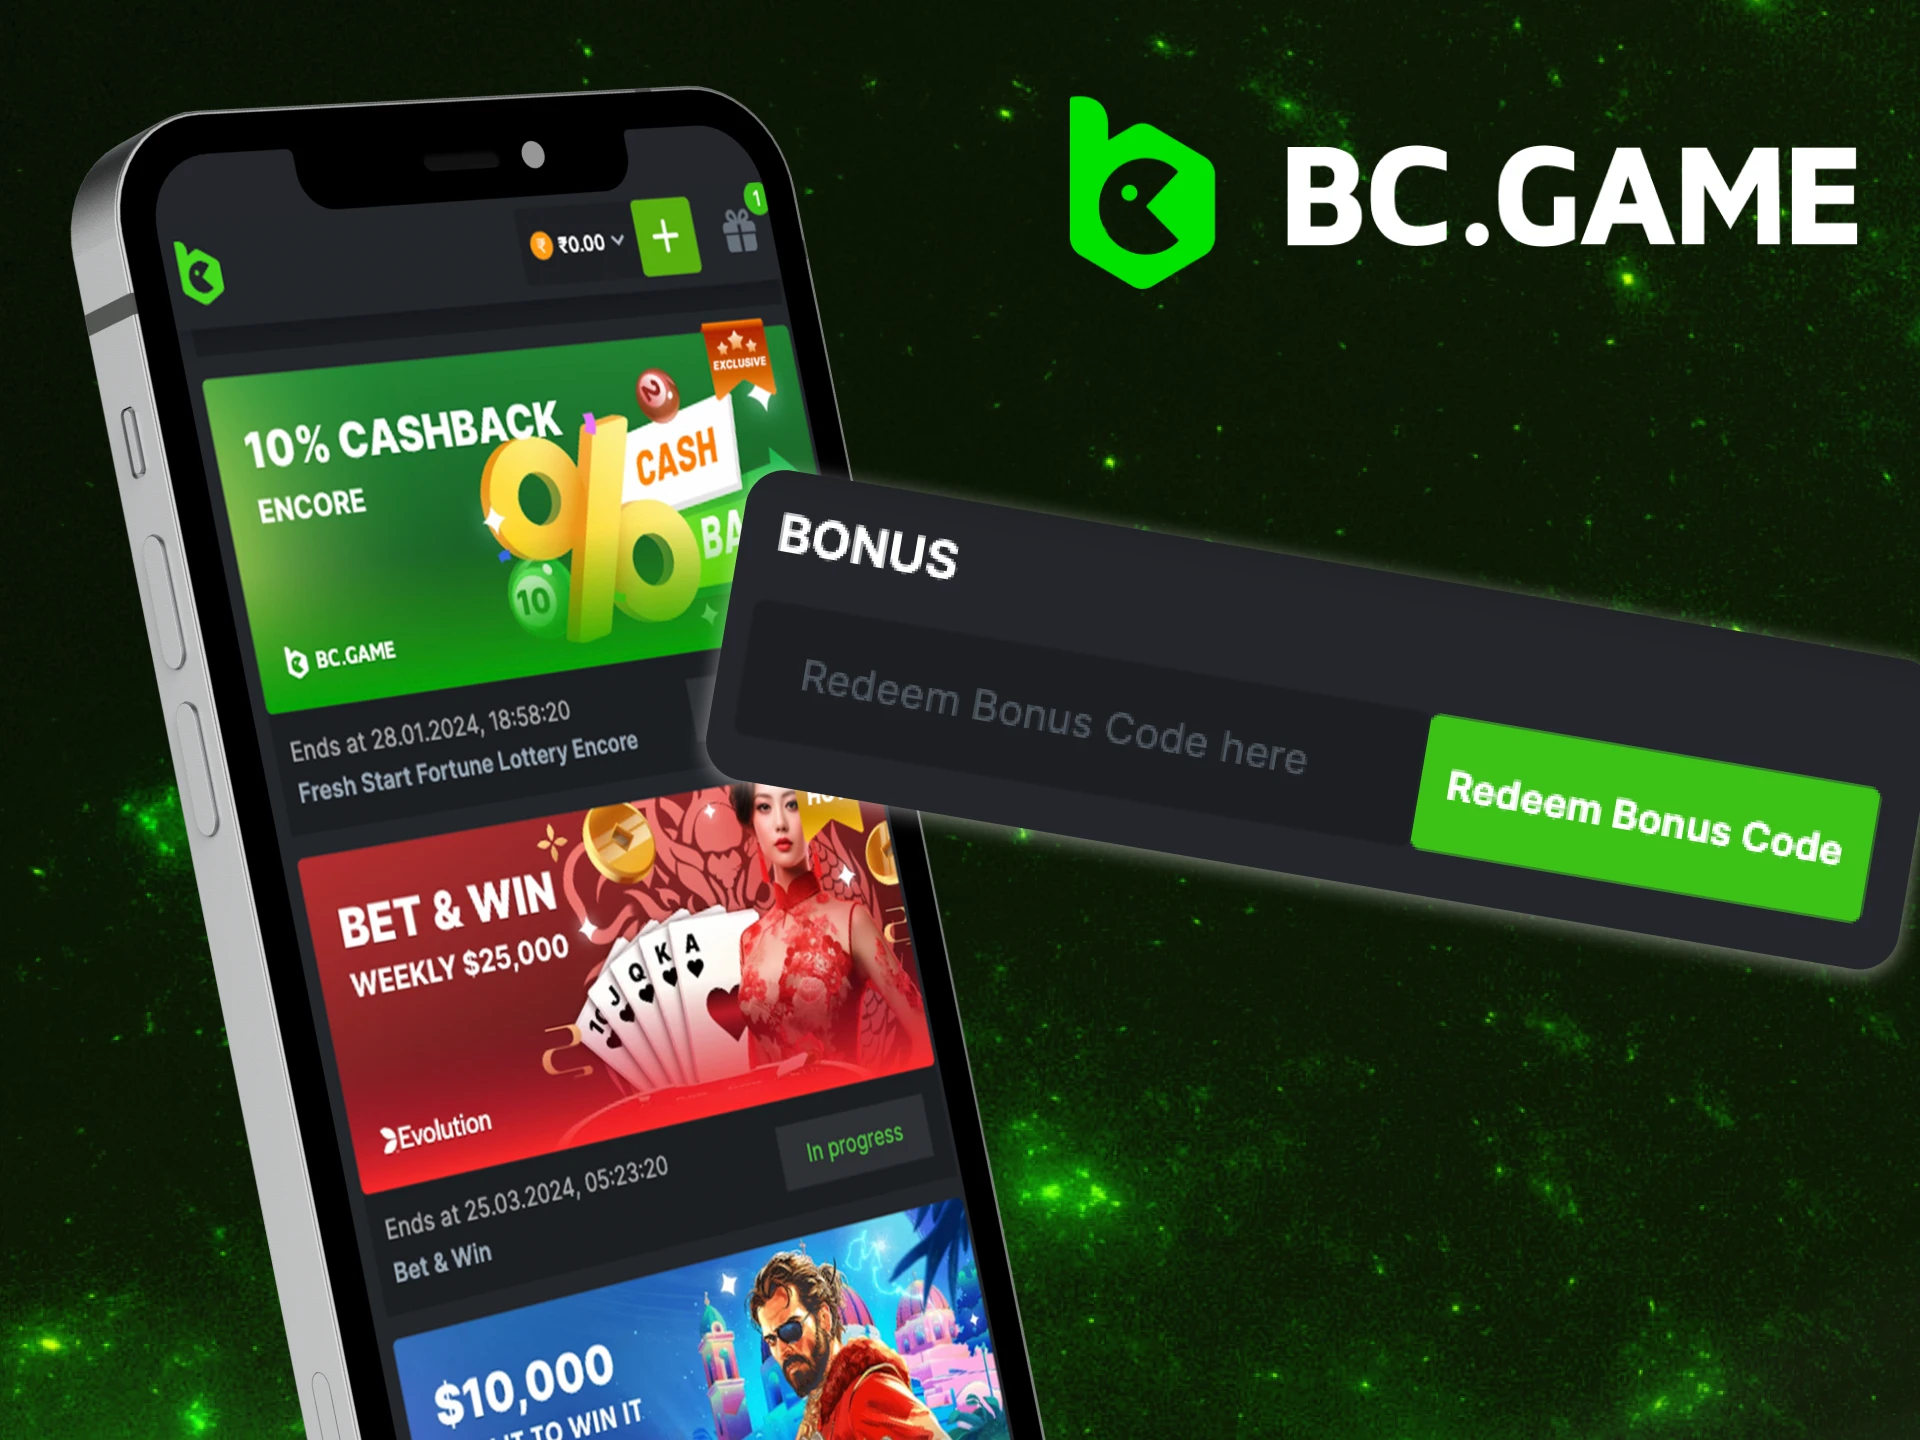 During registration, you can enter the promo code to get a bonus from BC Game.